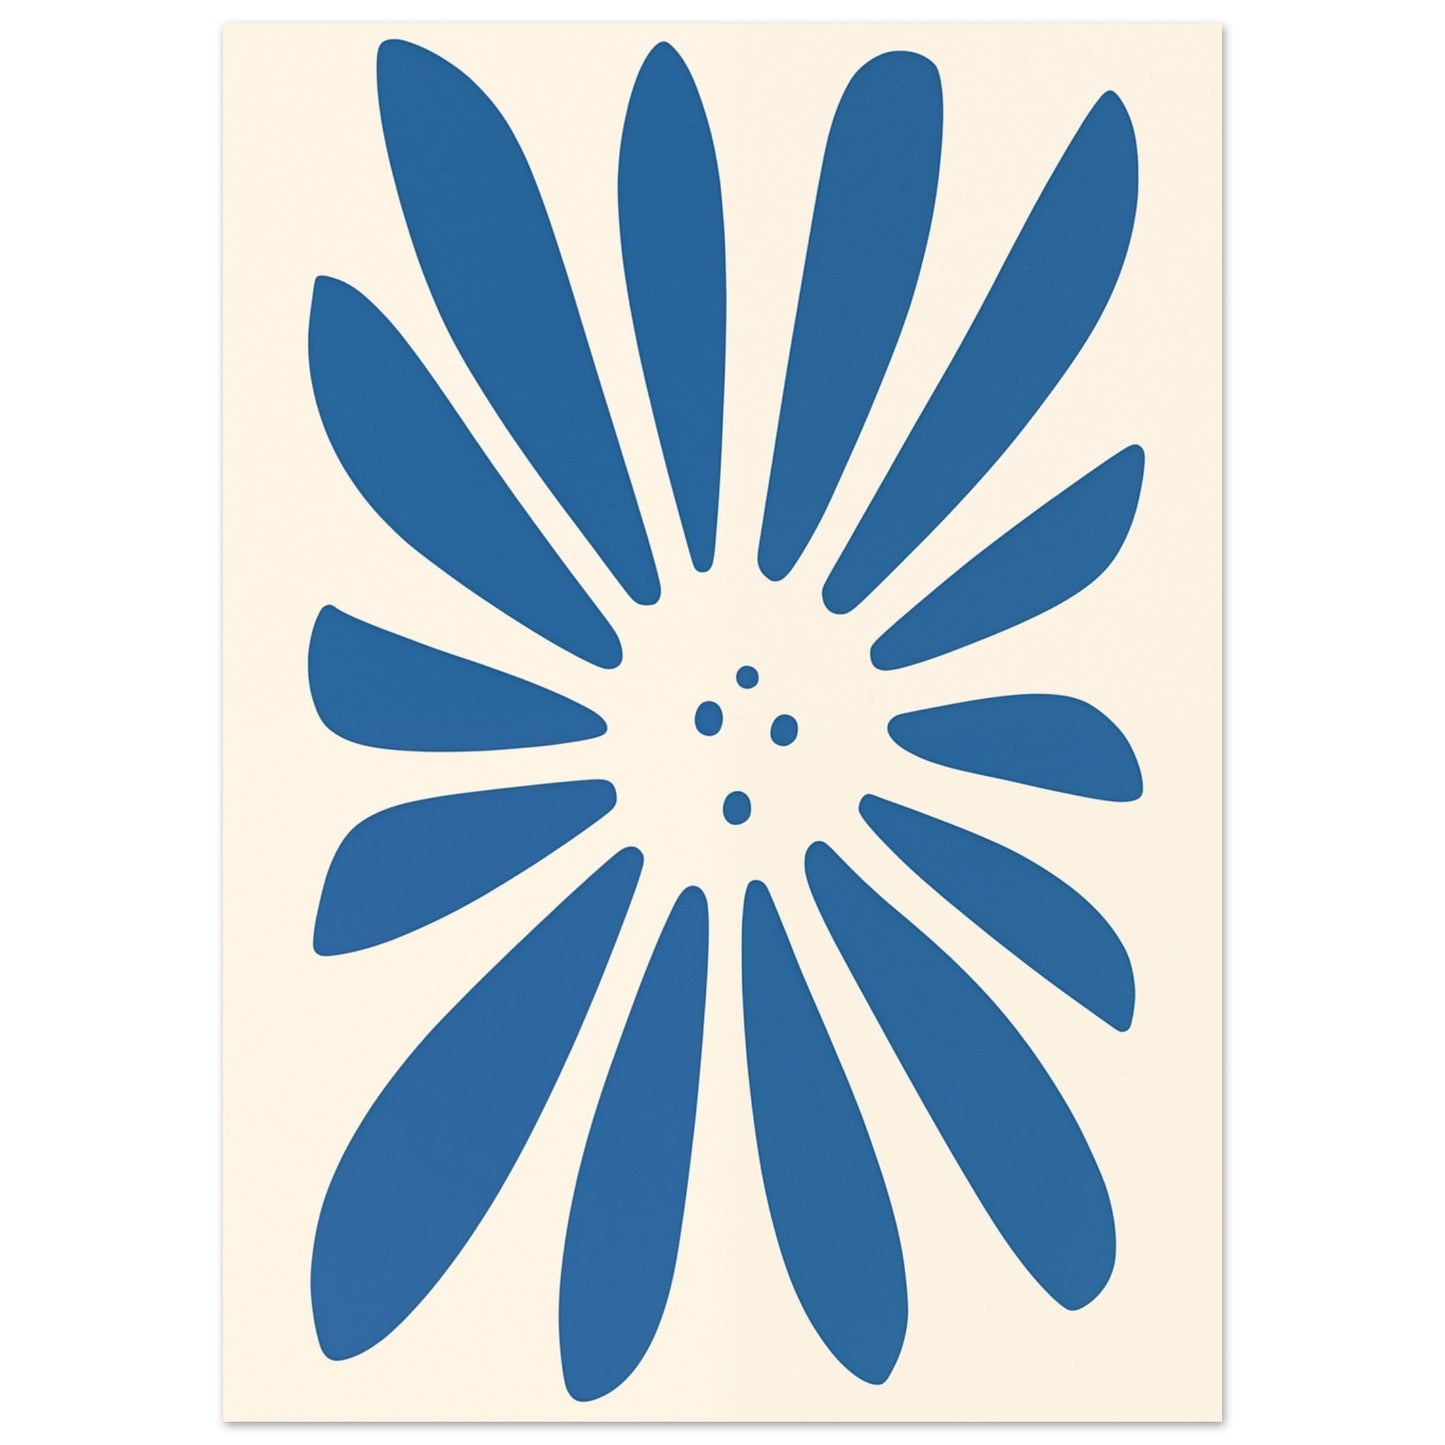 An Azure Blossom design displayed on a white background, perfect for adding a touch of elegance to any space.